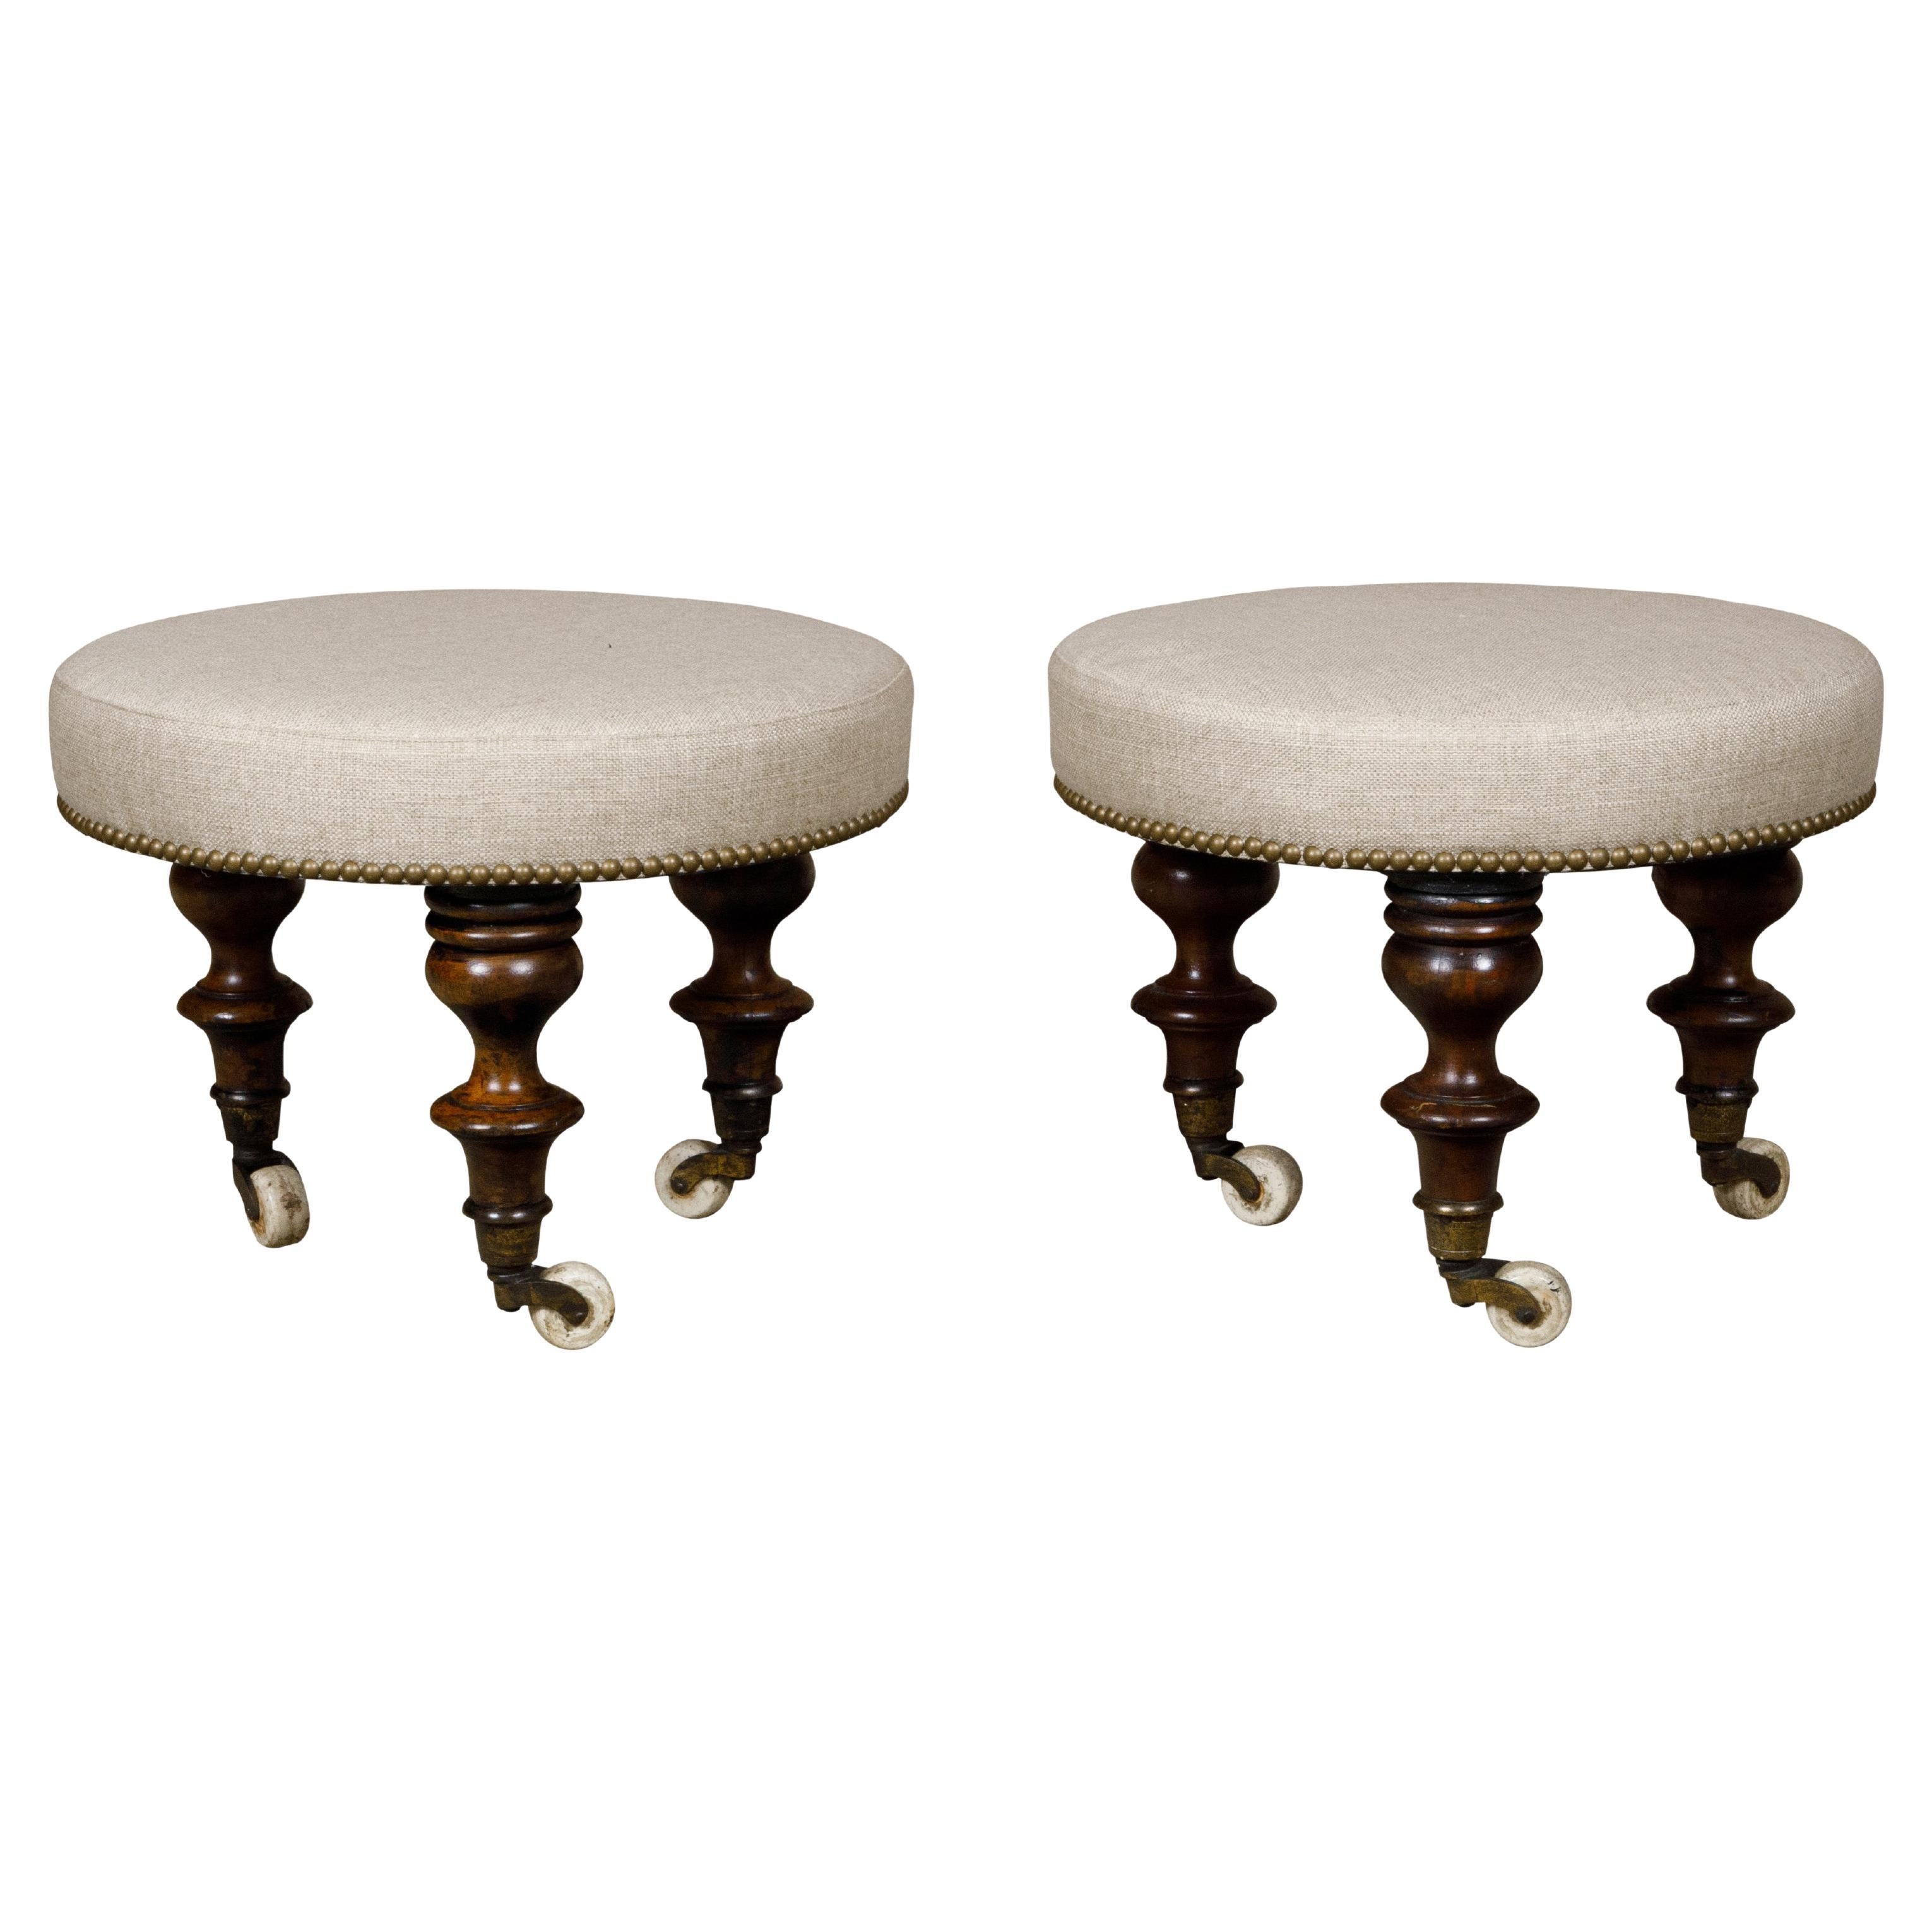 English Mahogany Stools with 19th Century Turned Legs on Casters, a Pair For Sale